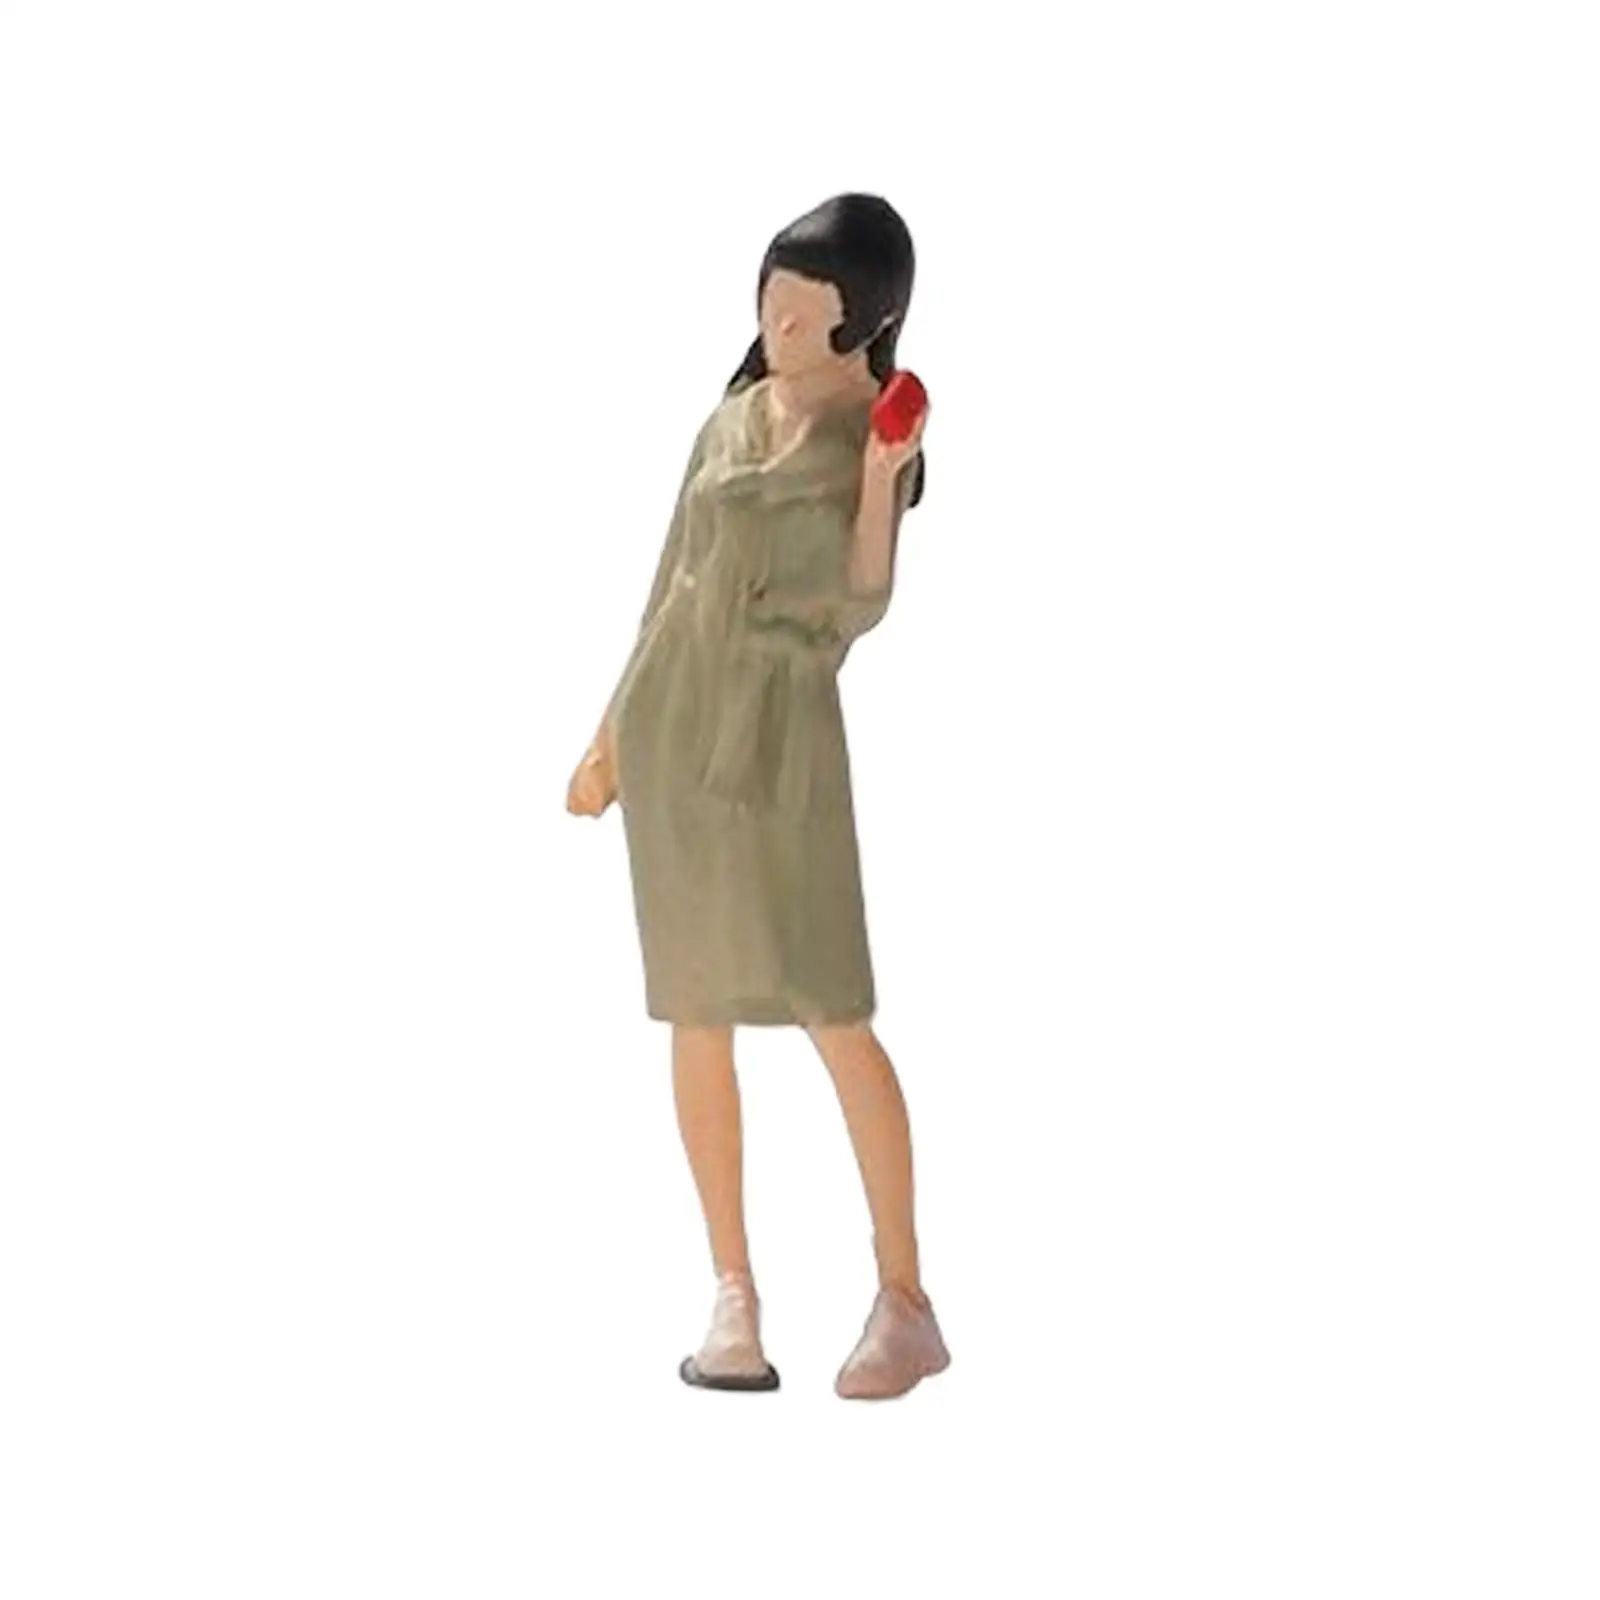 Painted Figures 1:64 Scale Miniature Girls Model for Train Station Layout